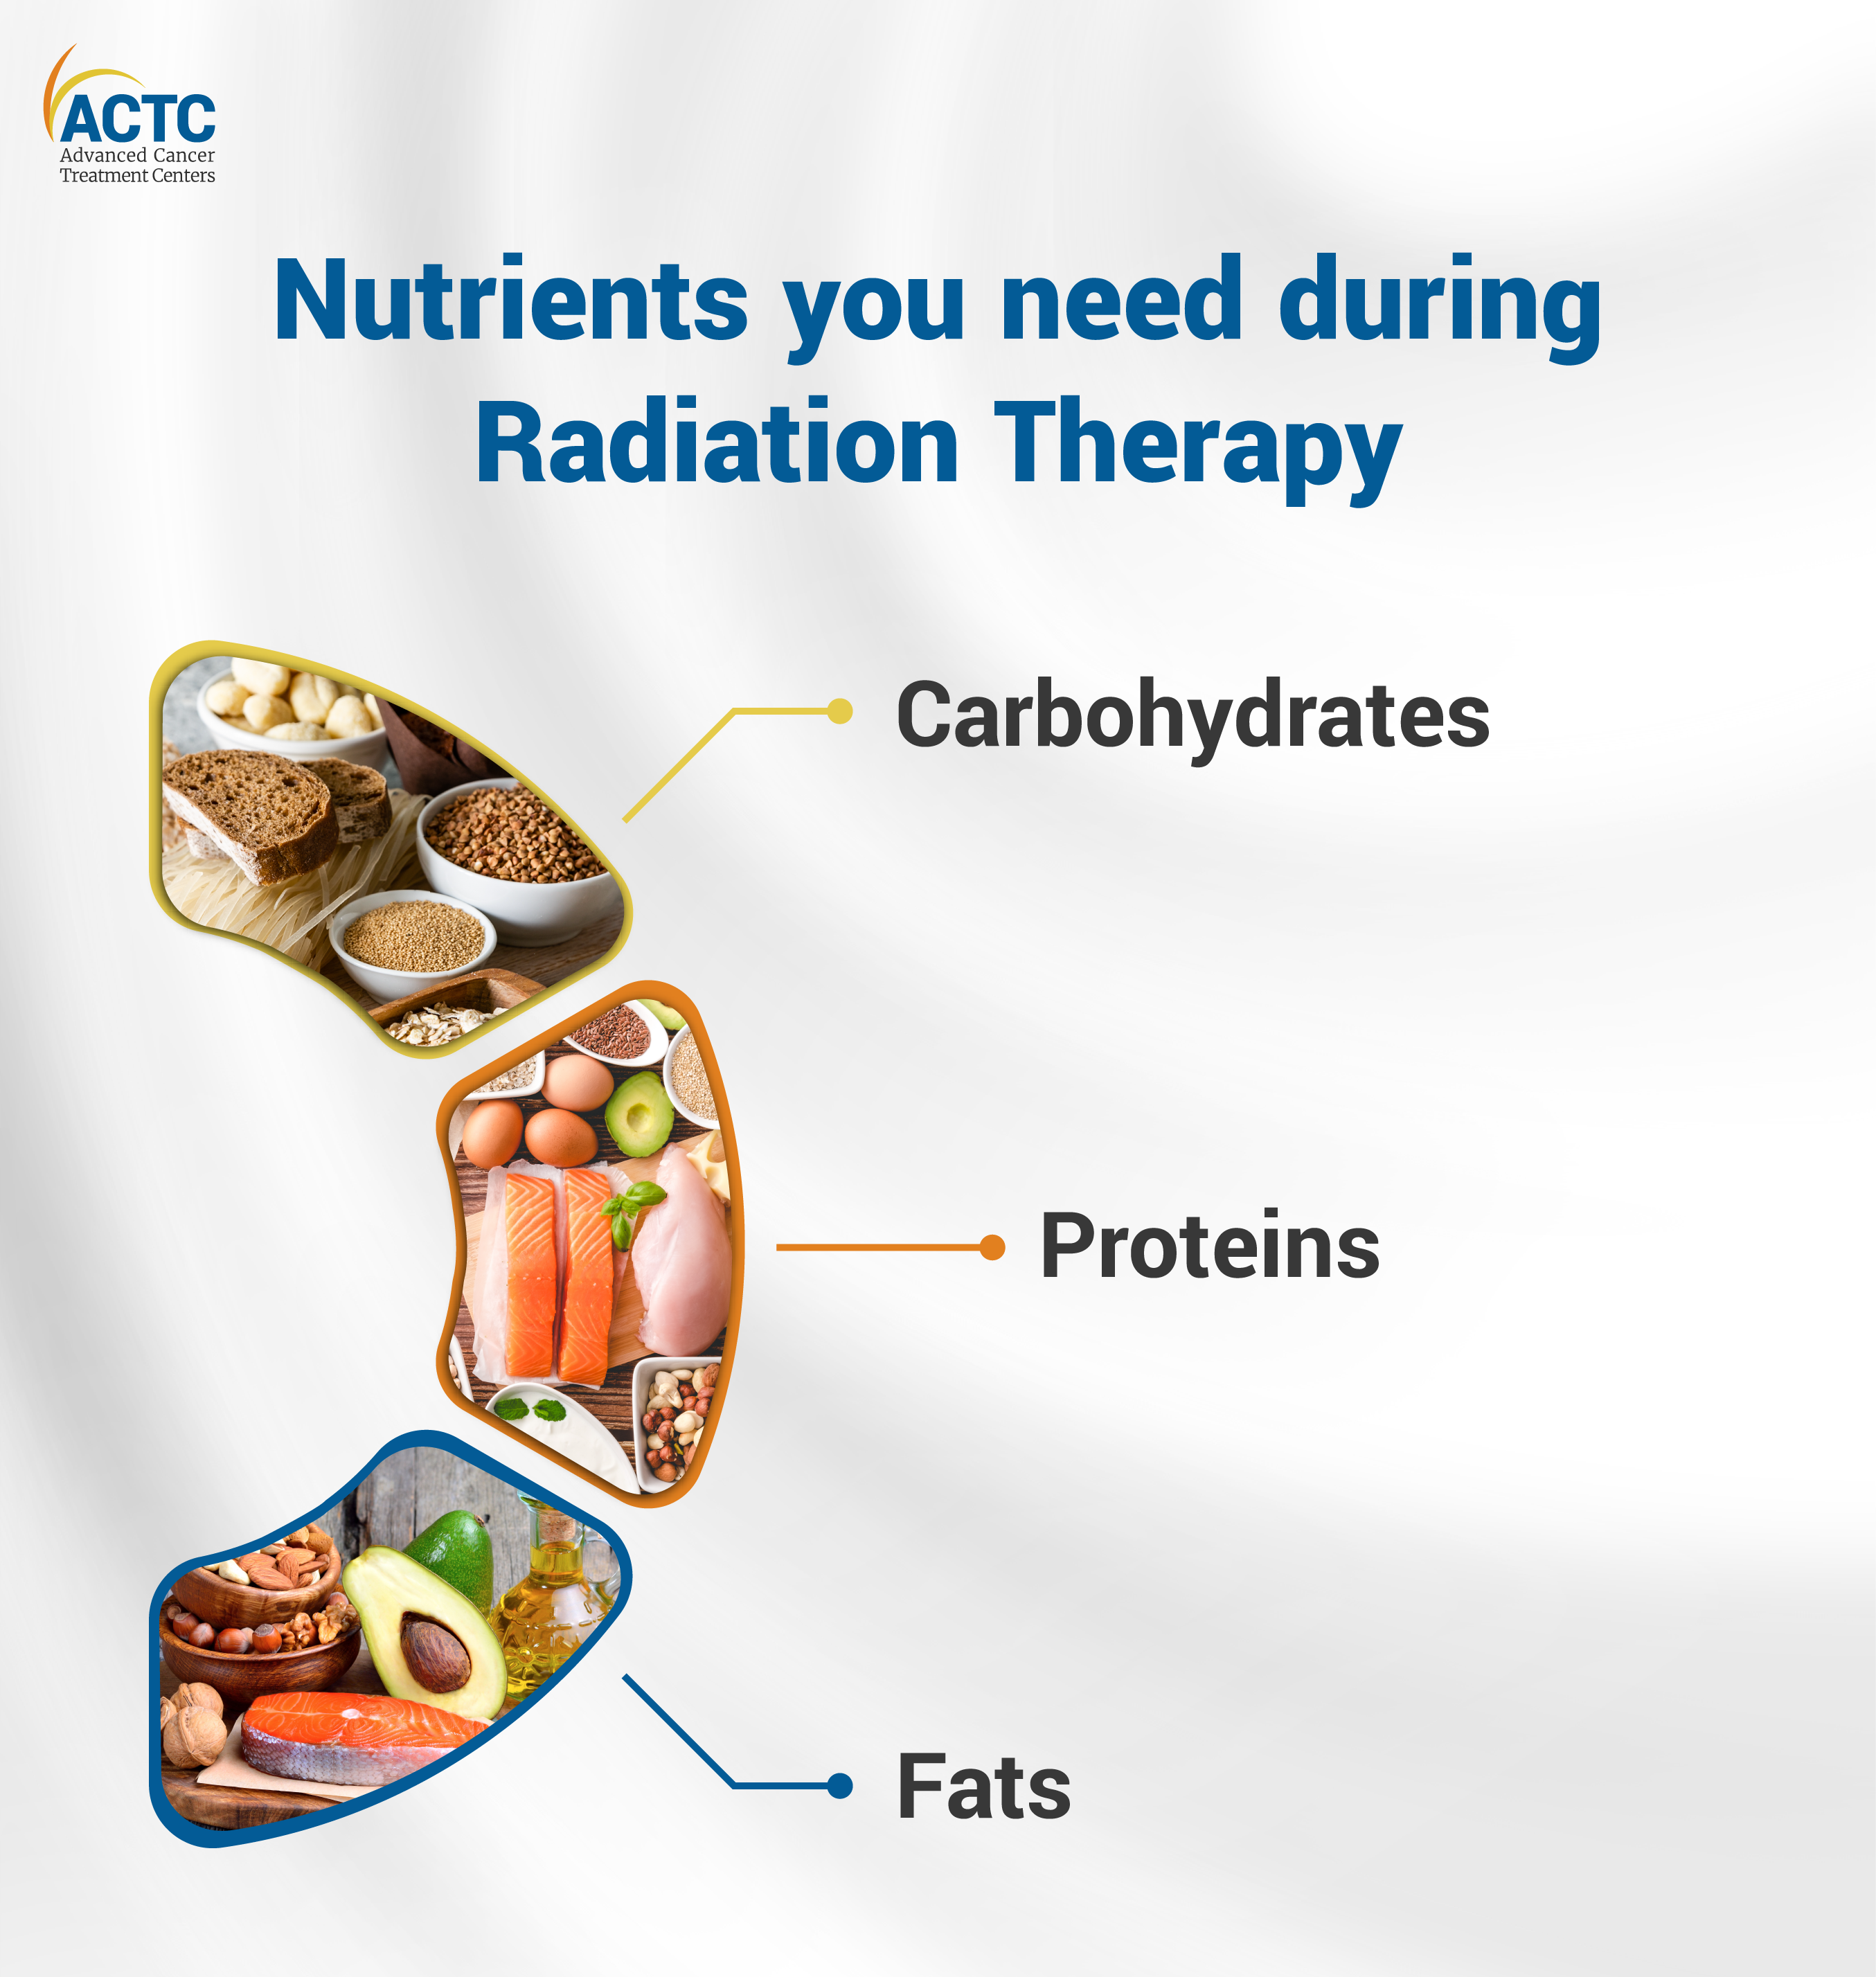 Macro-nutrients required during radiation therapy